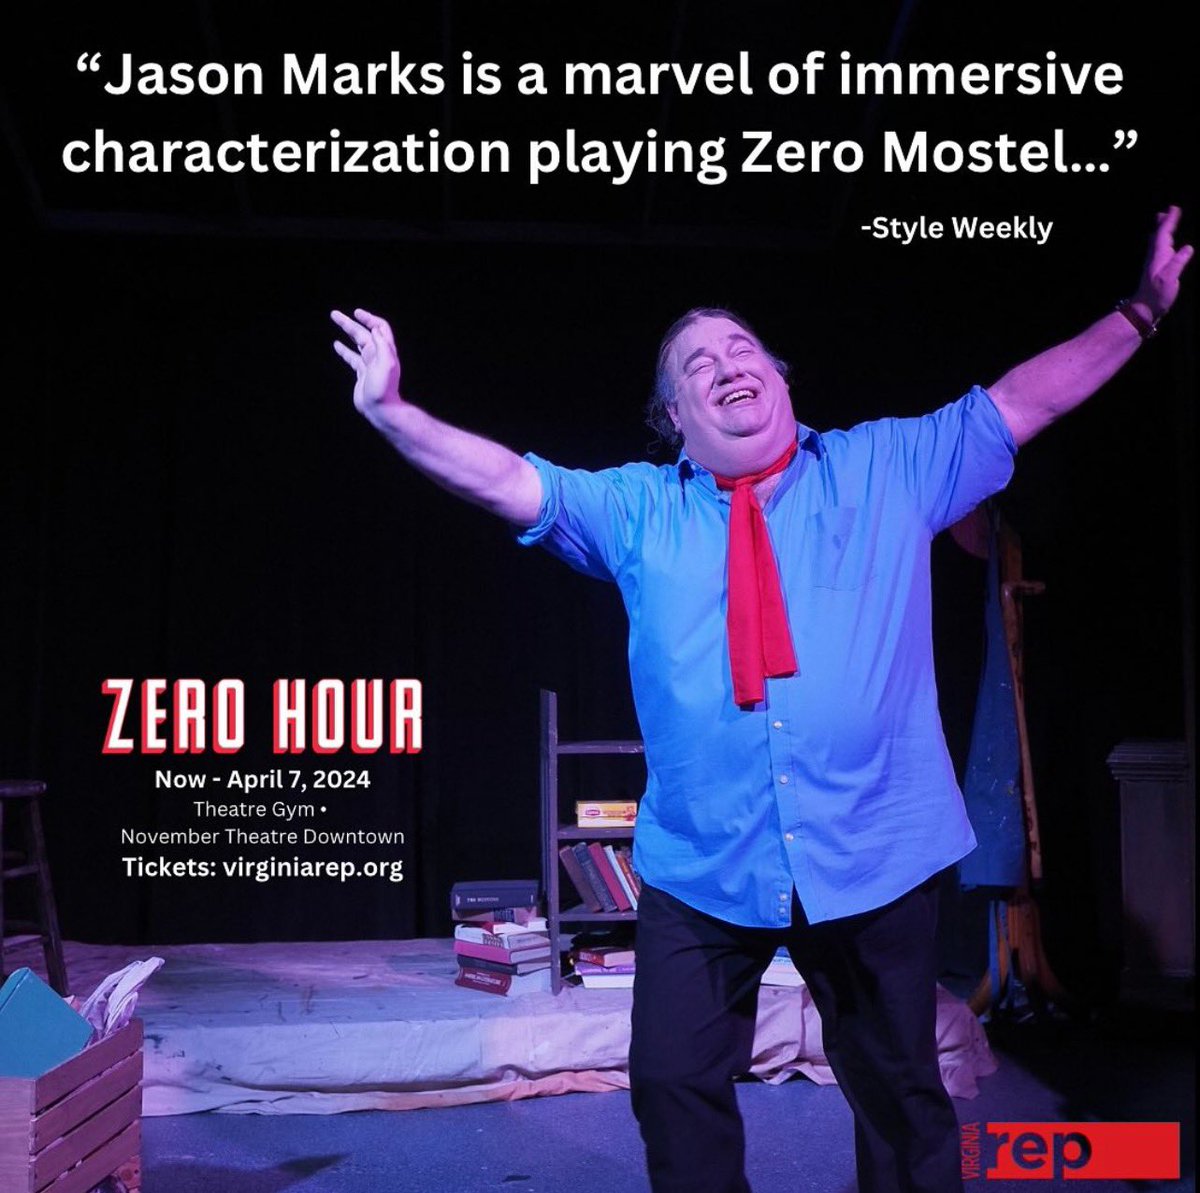 “Any human with a heart will relish the story of an embattled performer stubbornly struggling back to his feet every time he’s knocked down.” 
- @StyleWeekly 

ZERO HOUR is playing at @vareptheatre’s Theatre Gym stage through April 7th. 

styleweekly.com/larger-than-li…